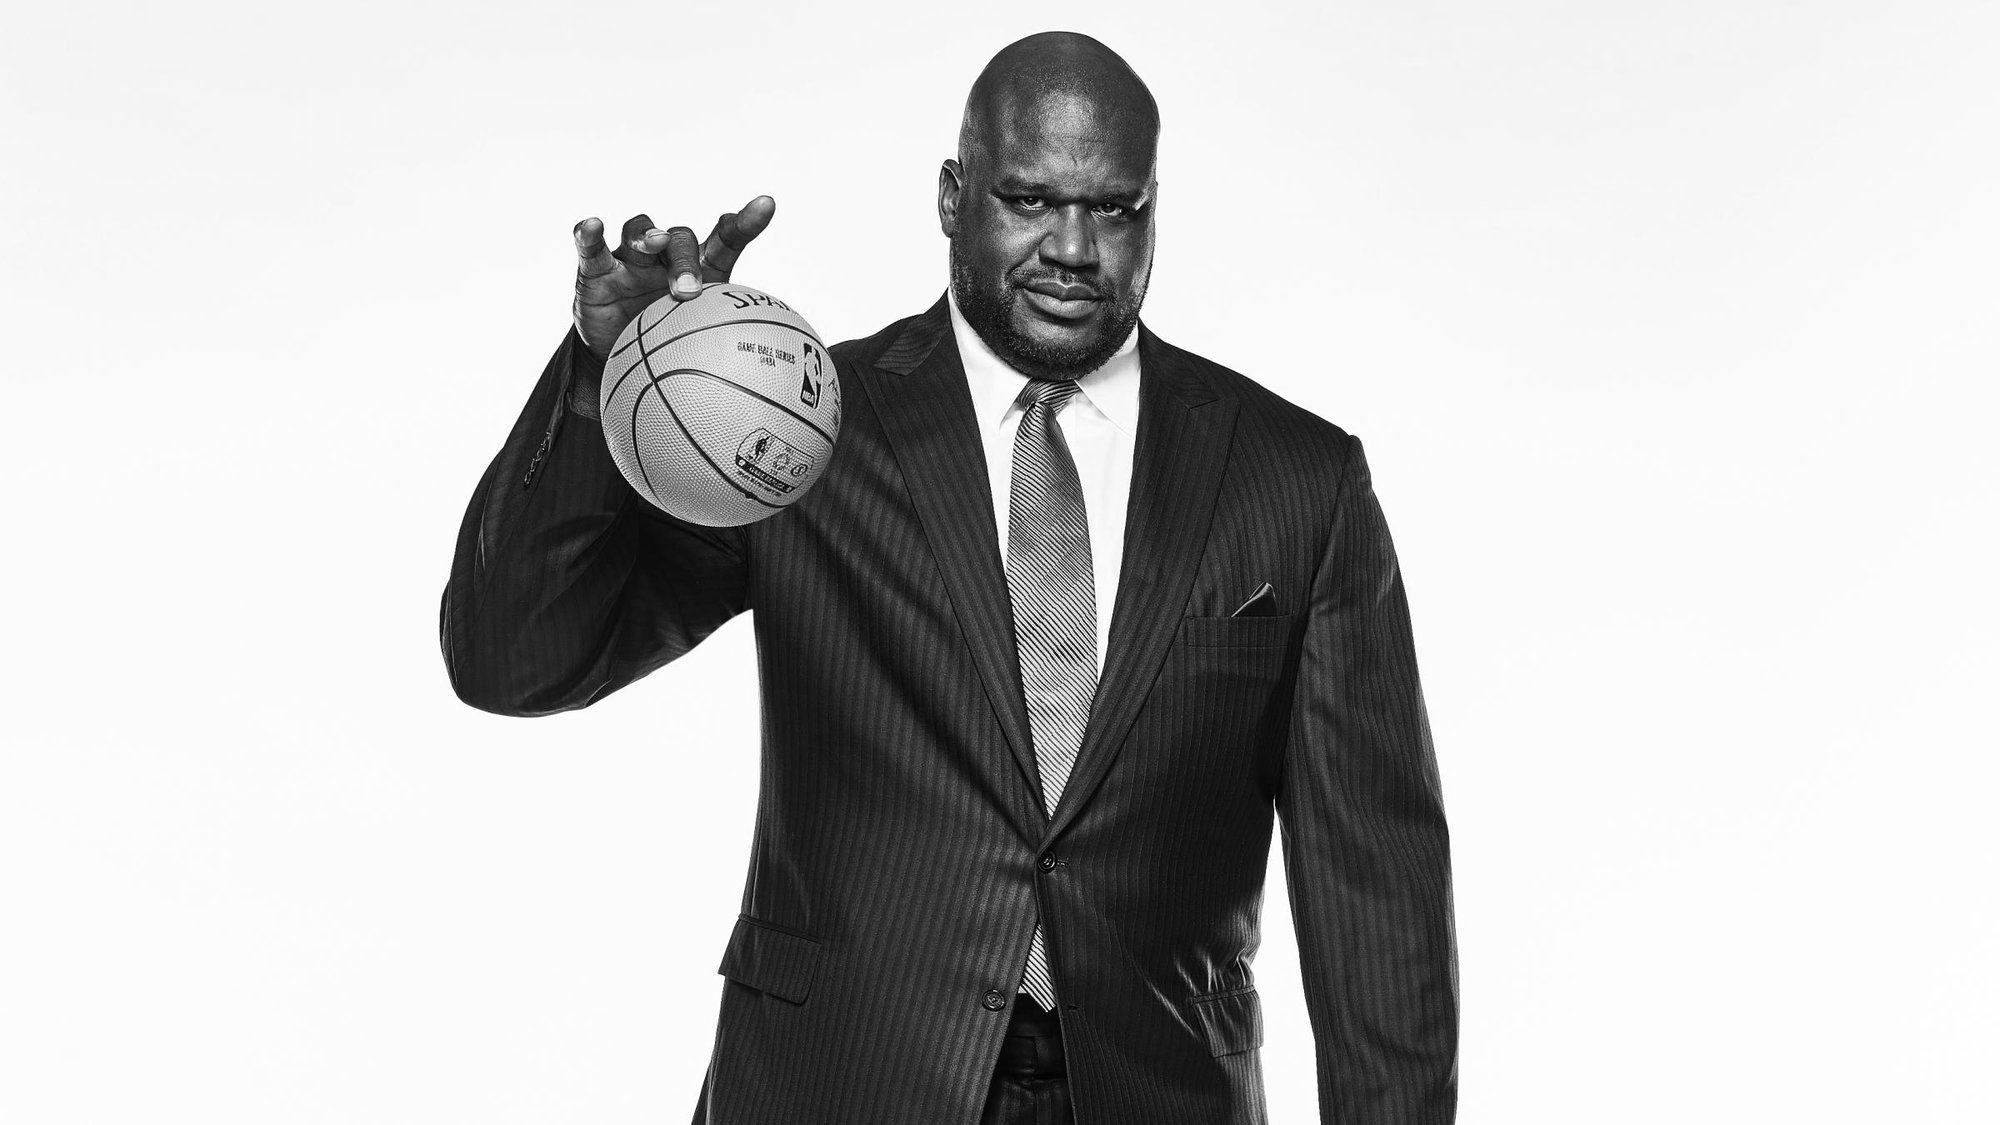 Shaquille O'Neal playing with a small basketball